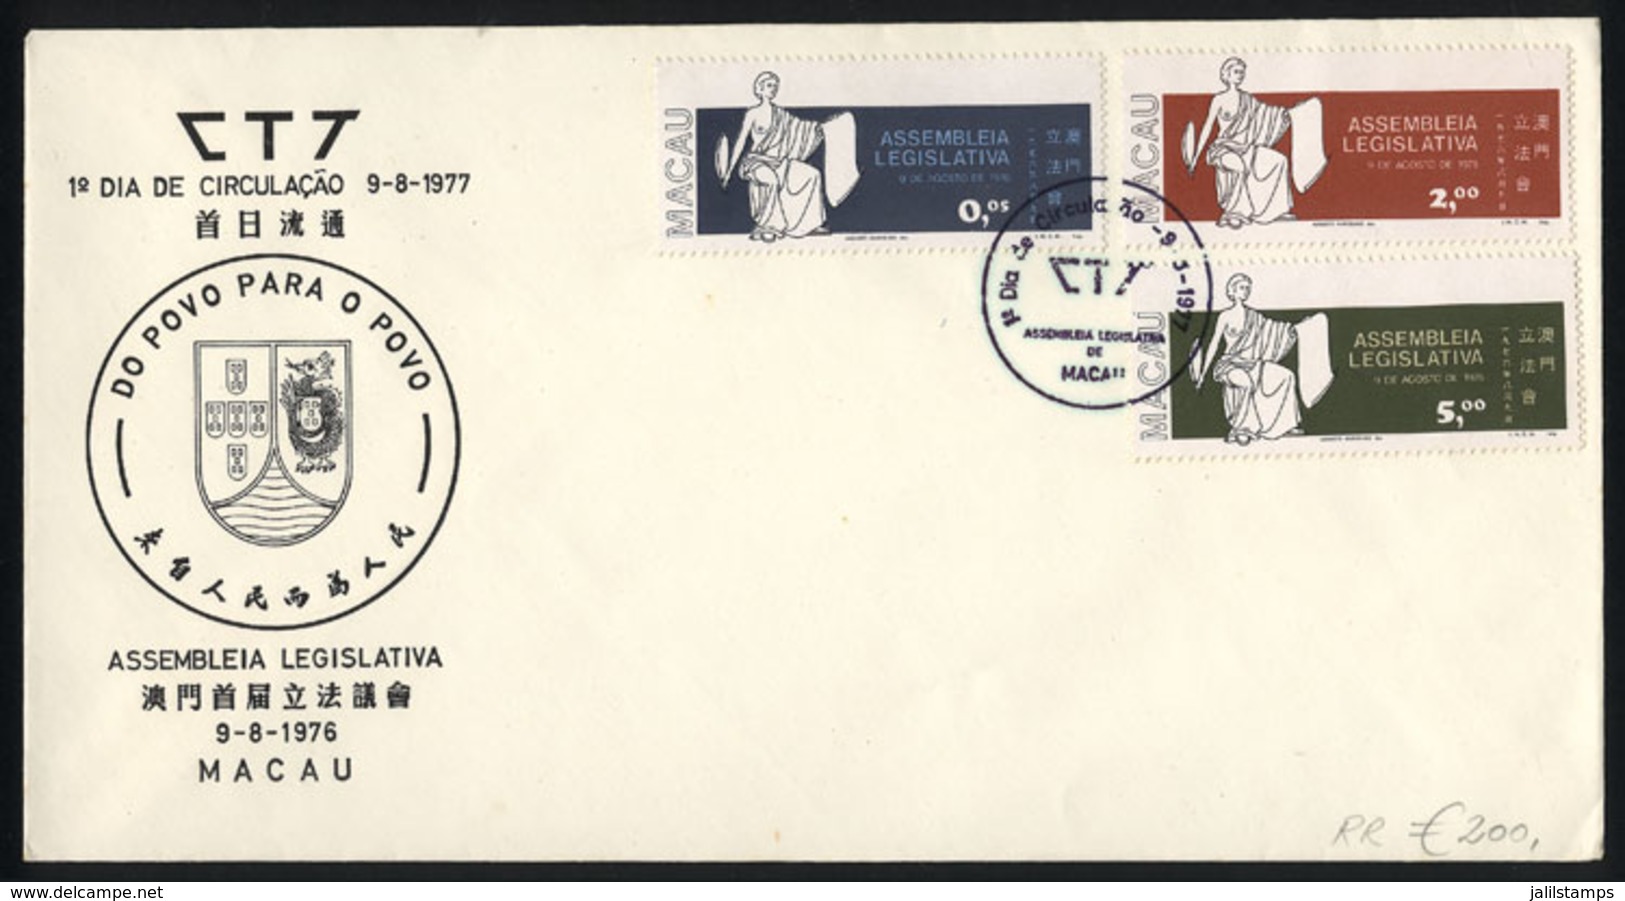 MACAU: Sc.440/2, 1978 National Assembly, Cmpl. Set Of 3 Values On FDC Covers, VF Quality, Rare! - FDC